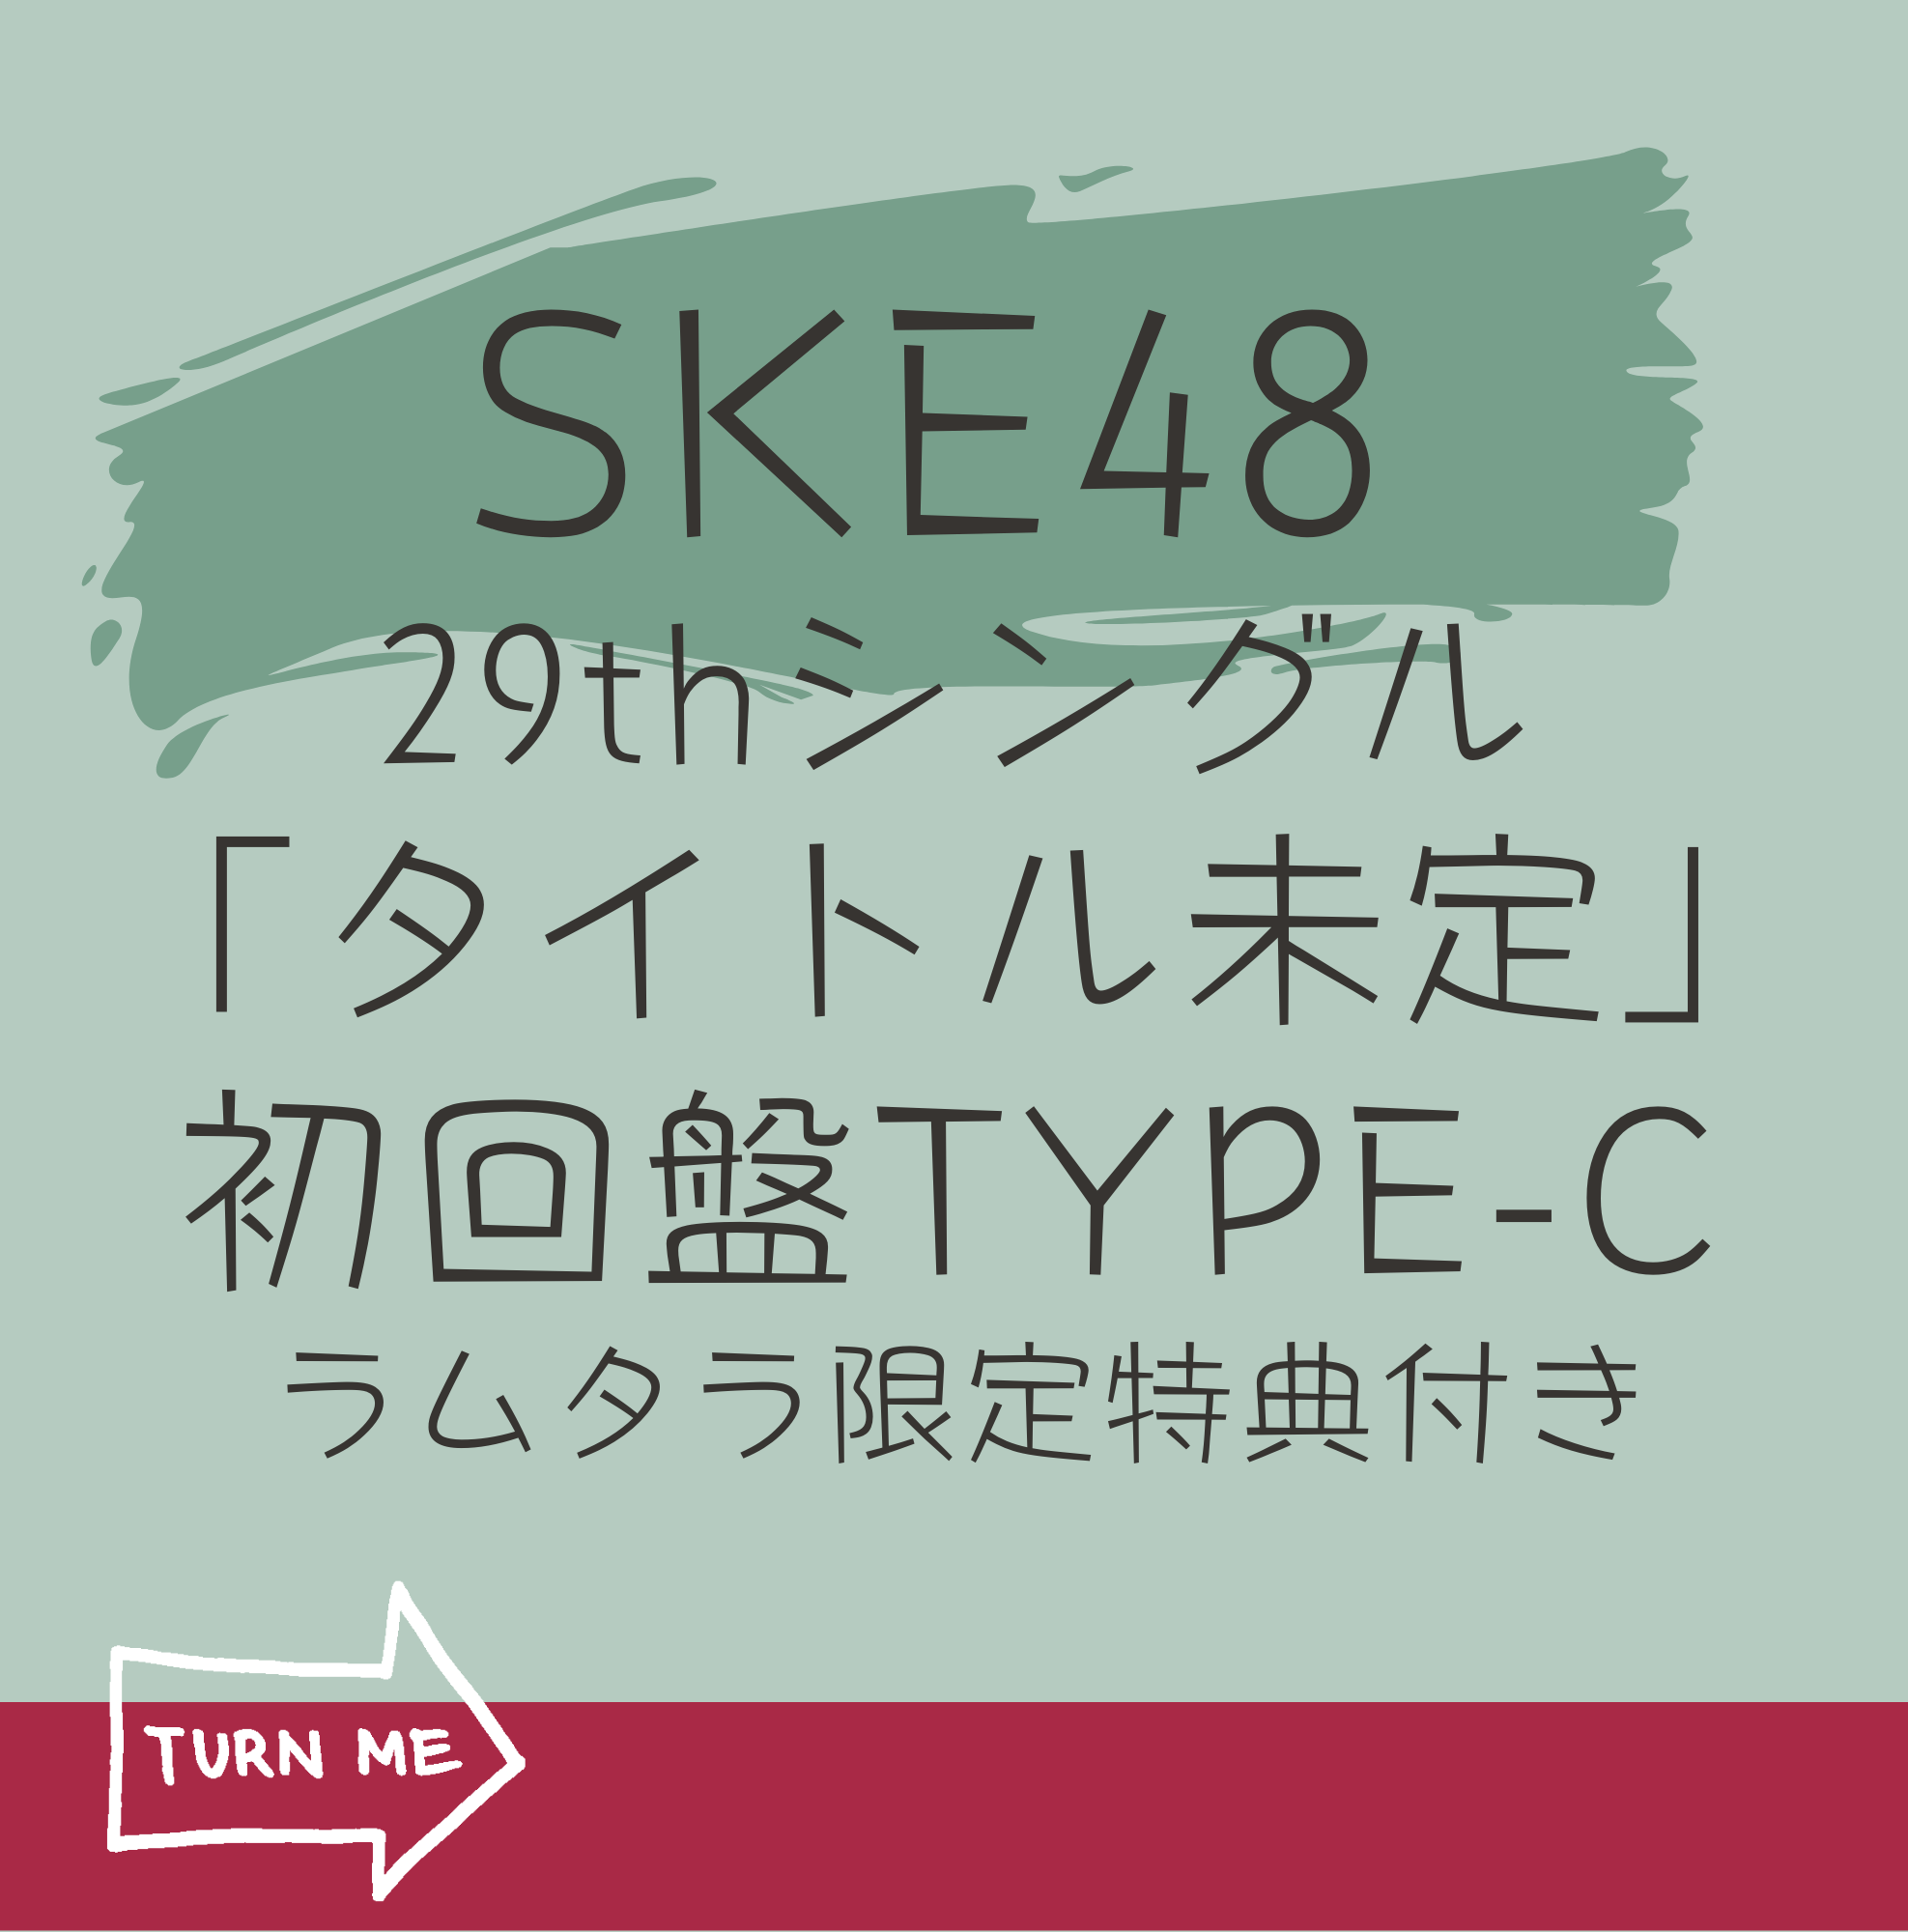 <strong style="font-size:12px;color:red;"><font color="red">予約受付中!</font></strong> SKE48  29thシングル「タイトル未定」(CD+DVD)【初回限定盤 TYPE-C】 ラムタラ限定特典付き